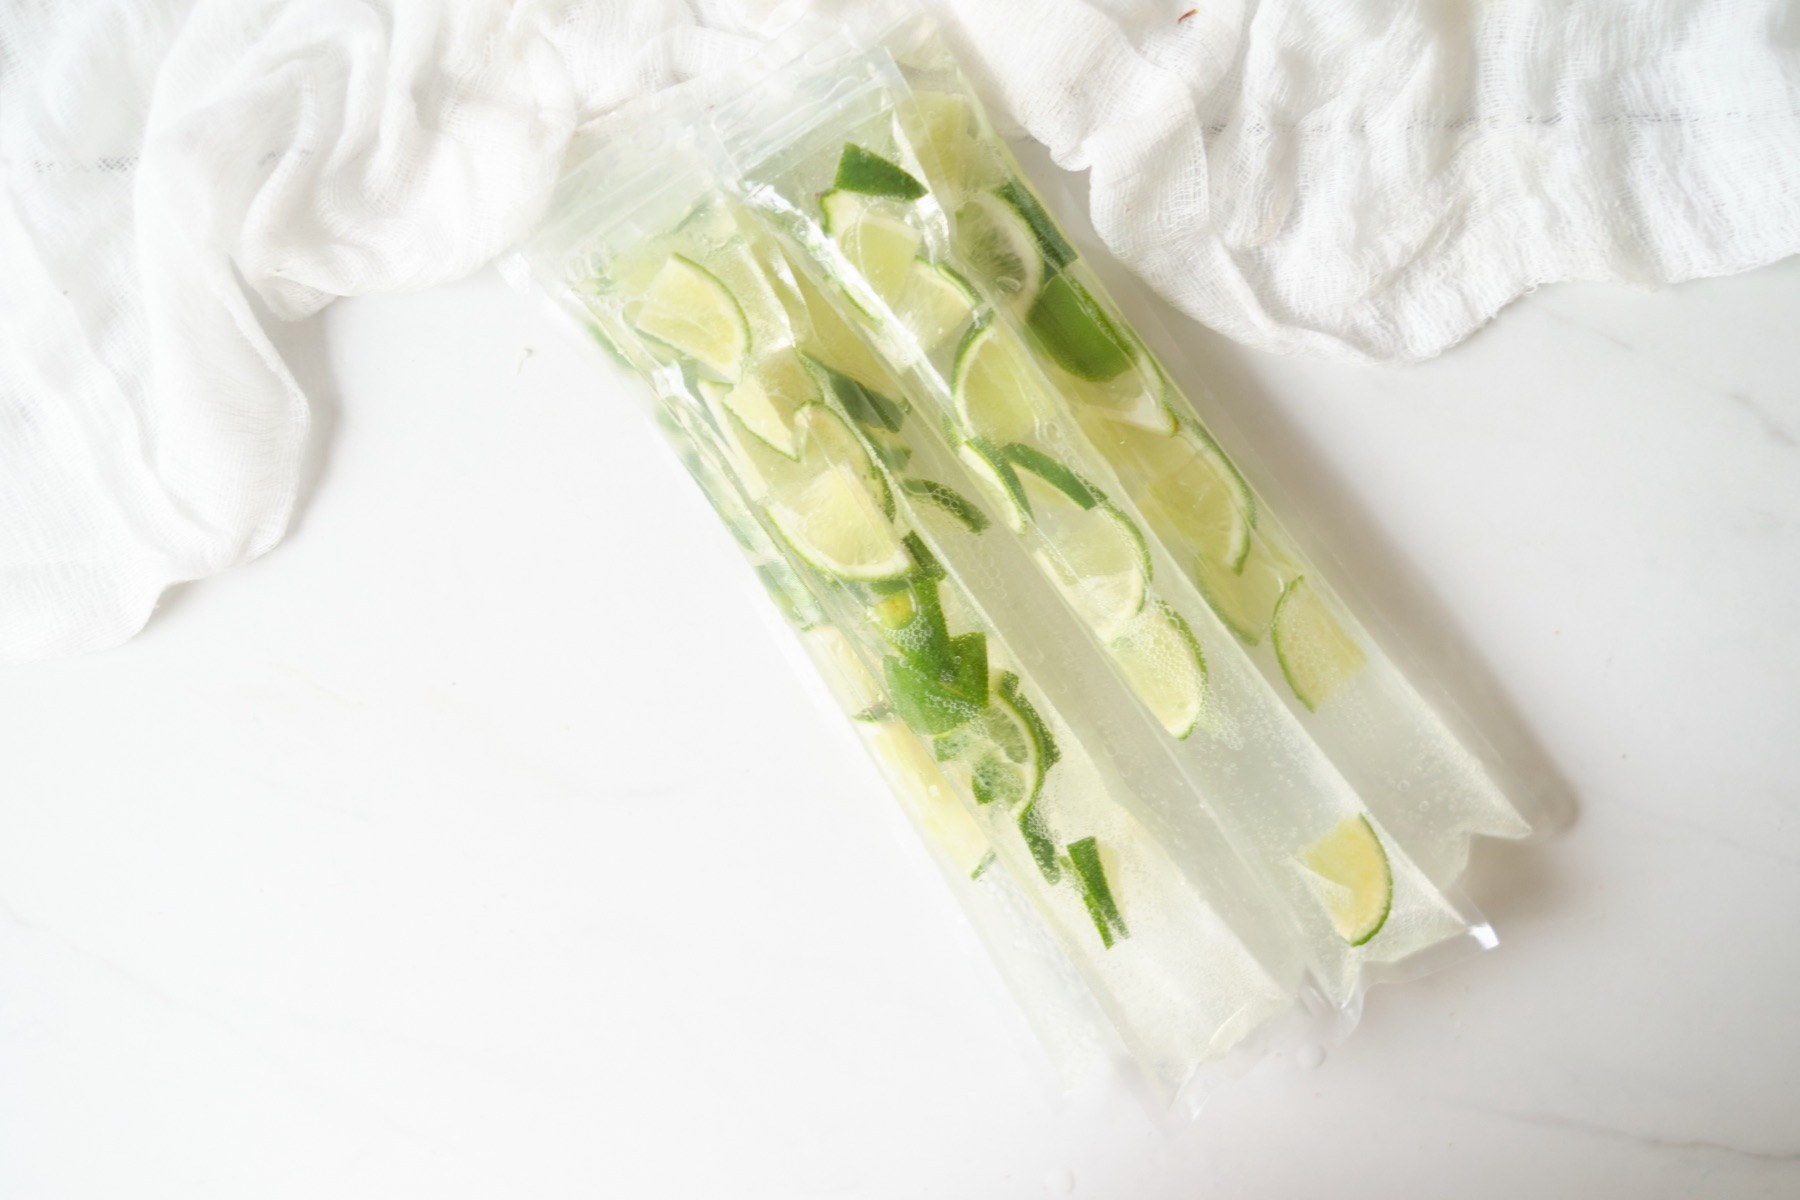 fill the freezer pop bags with gin tonic and limes